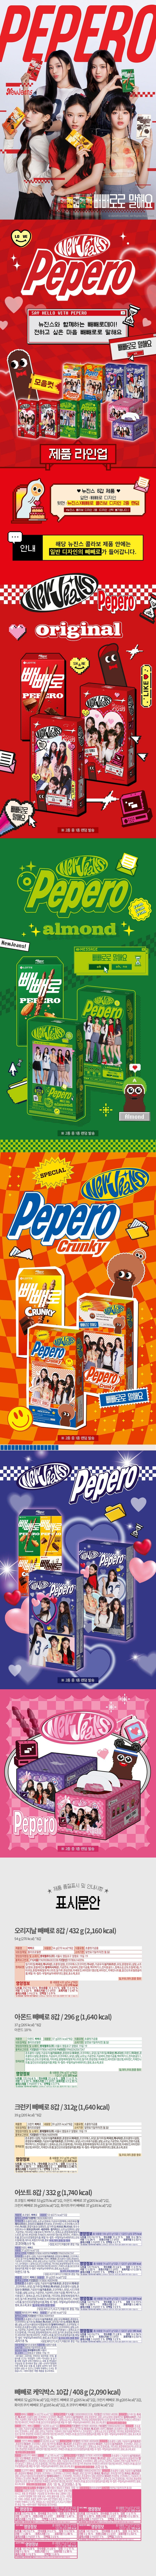 NewJeans x Pepero Special Edition Cake Box (10 packs)